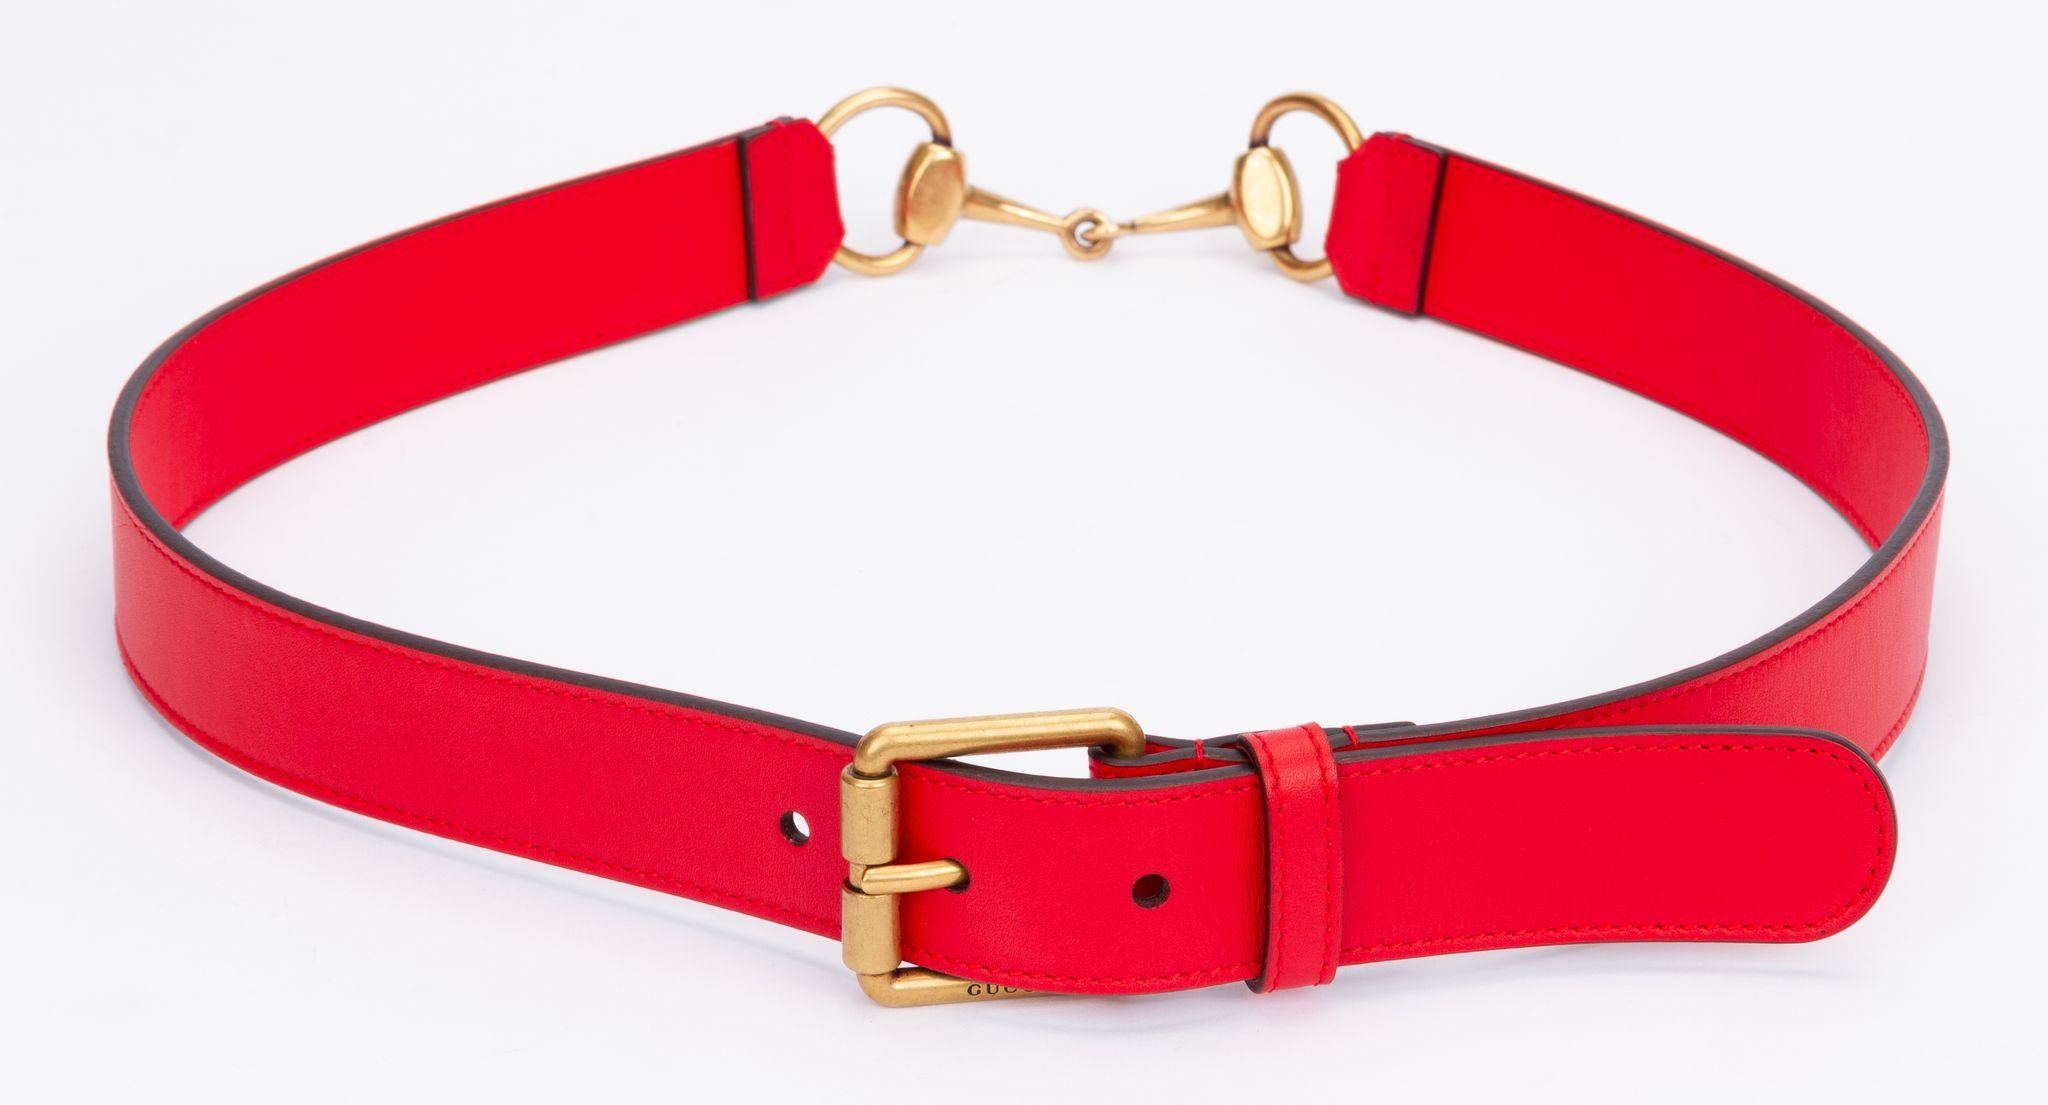 Gucci leather belt in red with a horse-bit detail which is made out of gold hardware. The piece comes with the original dust cover.